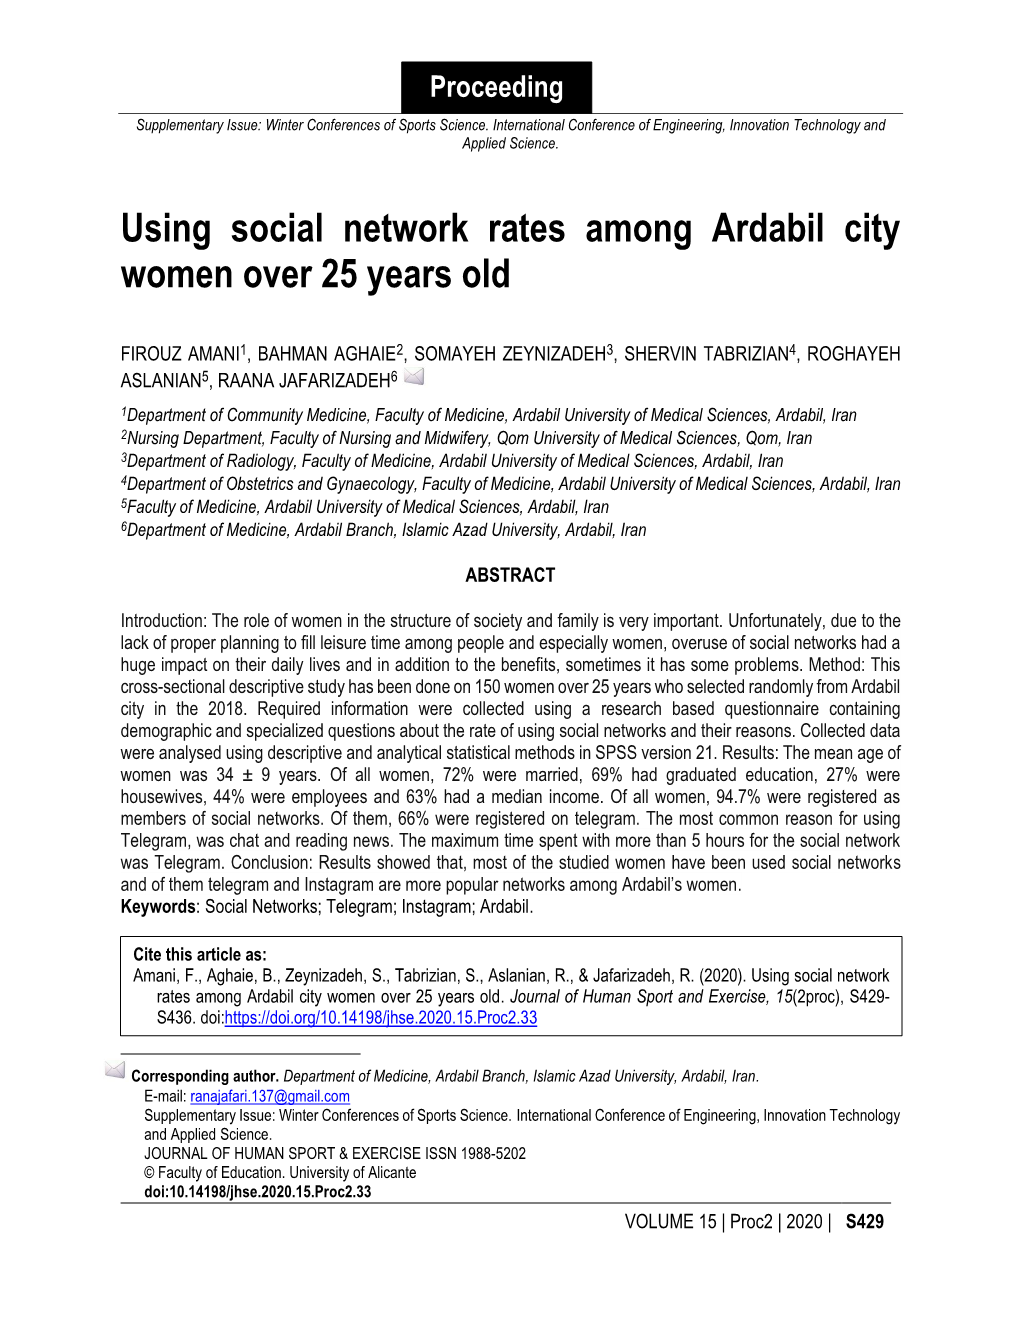 Using Social Network Rates Among Ardabil City Women Over 25 Years Old